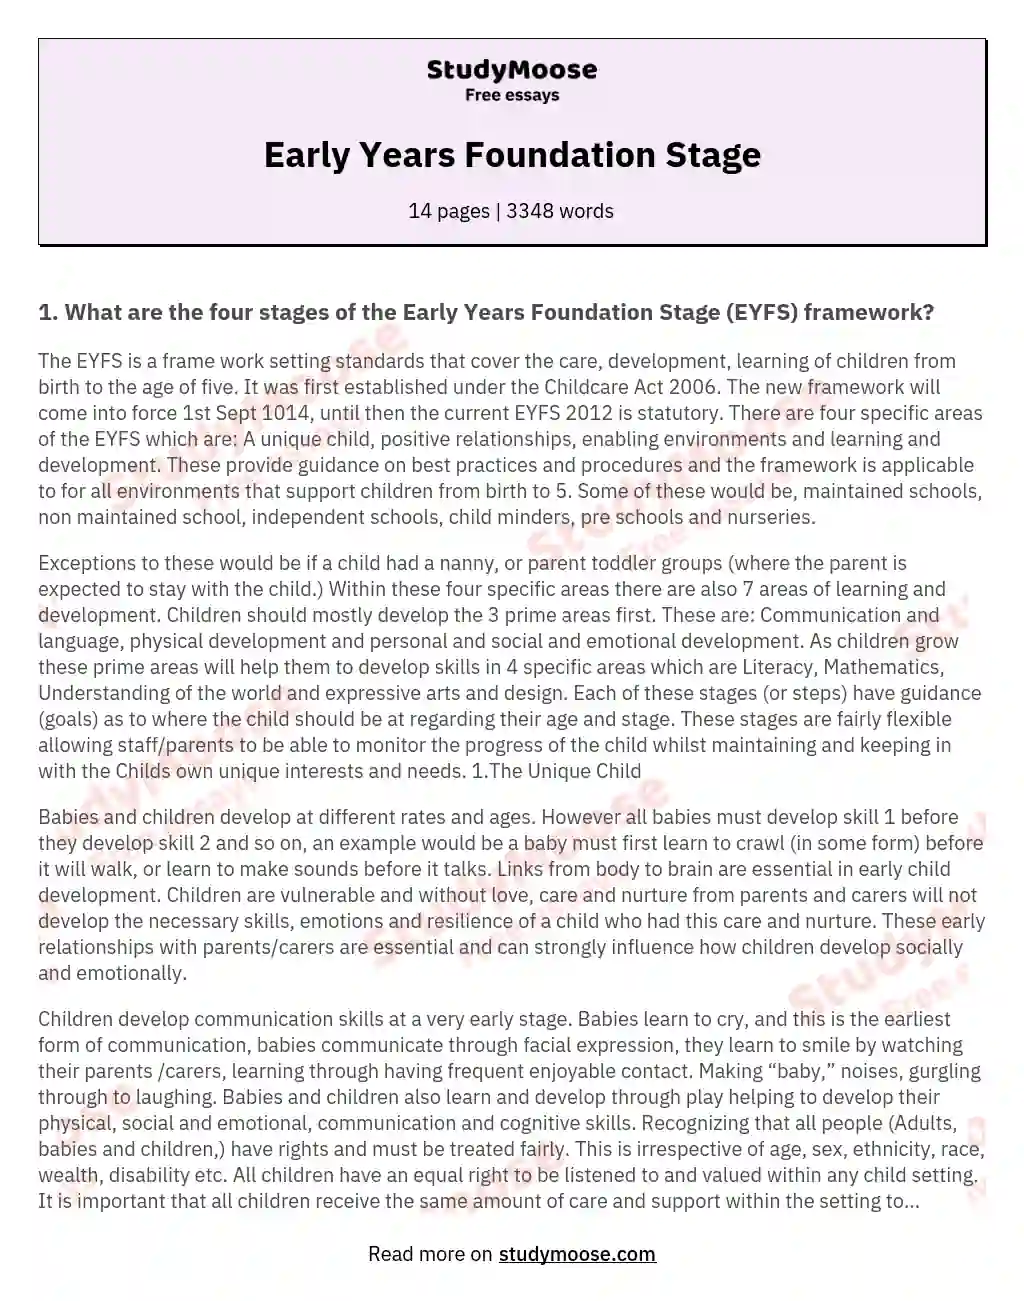 Early Years Foundation Stage essay